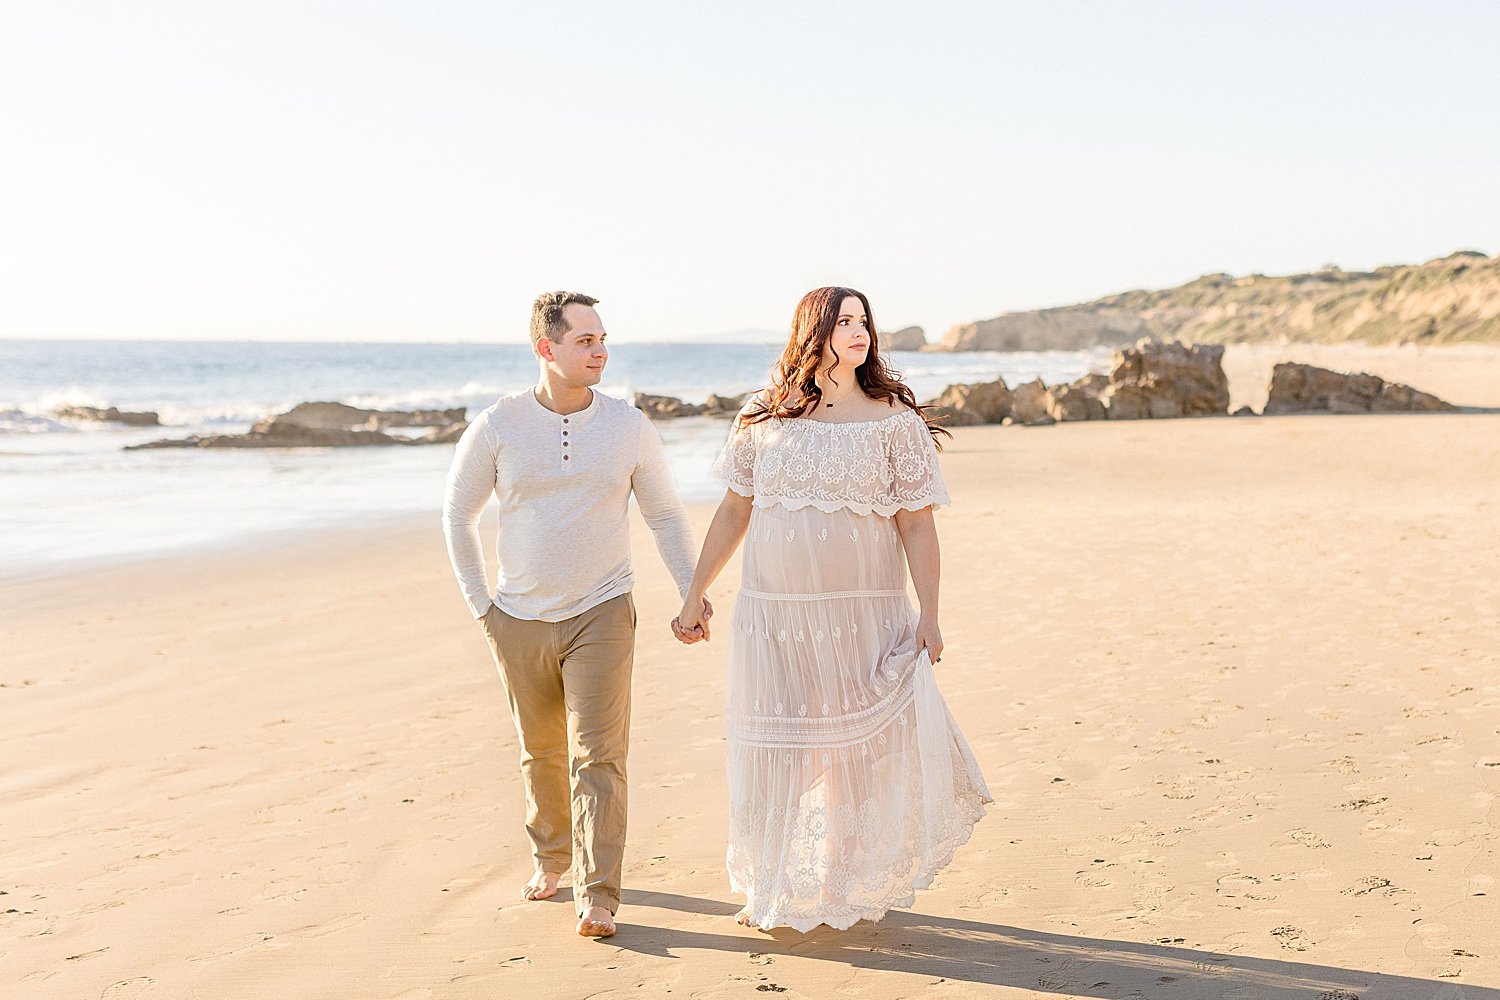 Crystal Cove beach maternity session at sunset | Ambre Williams Photography